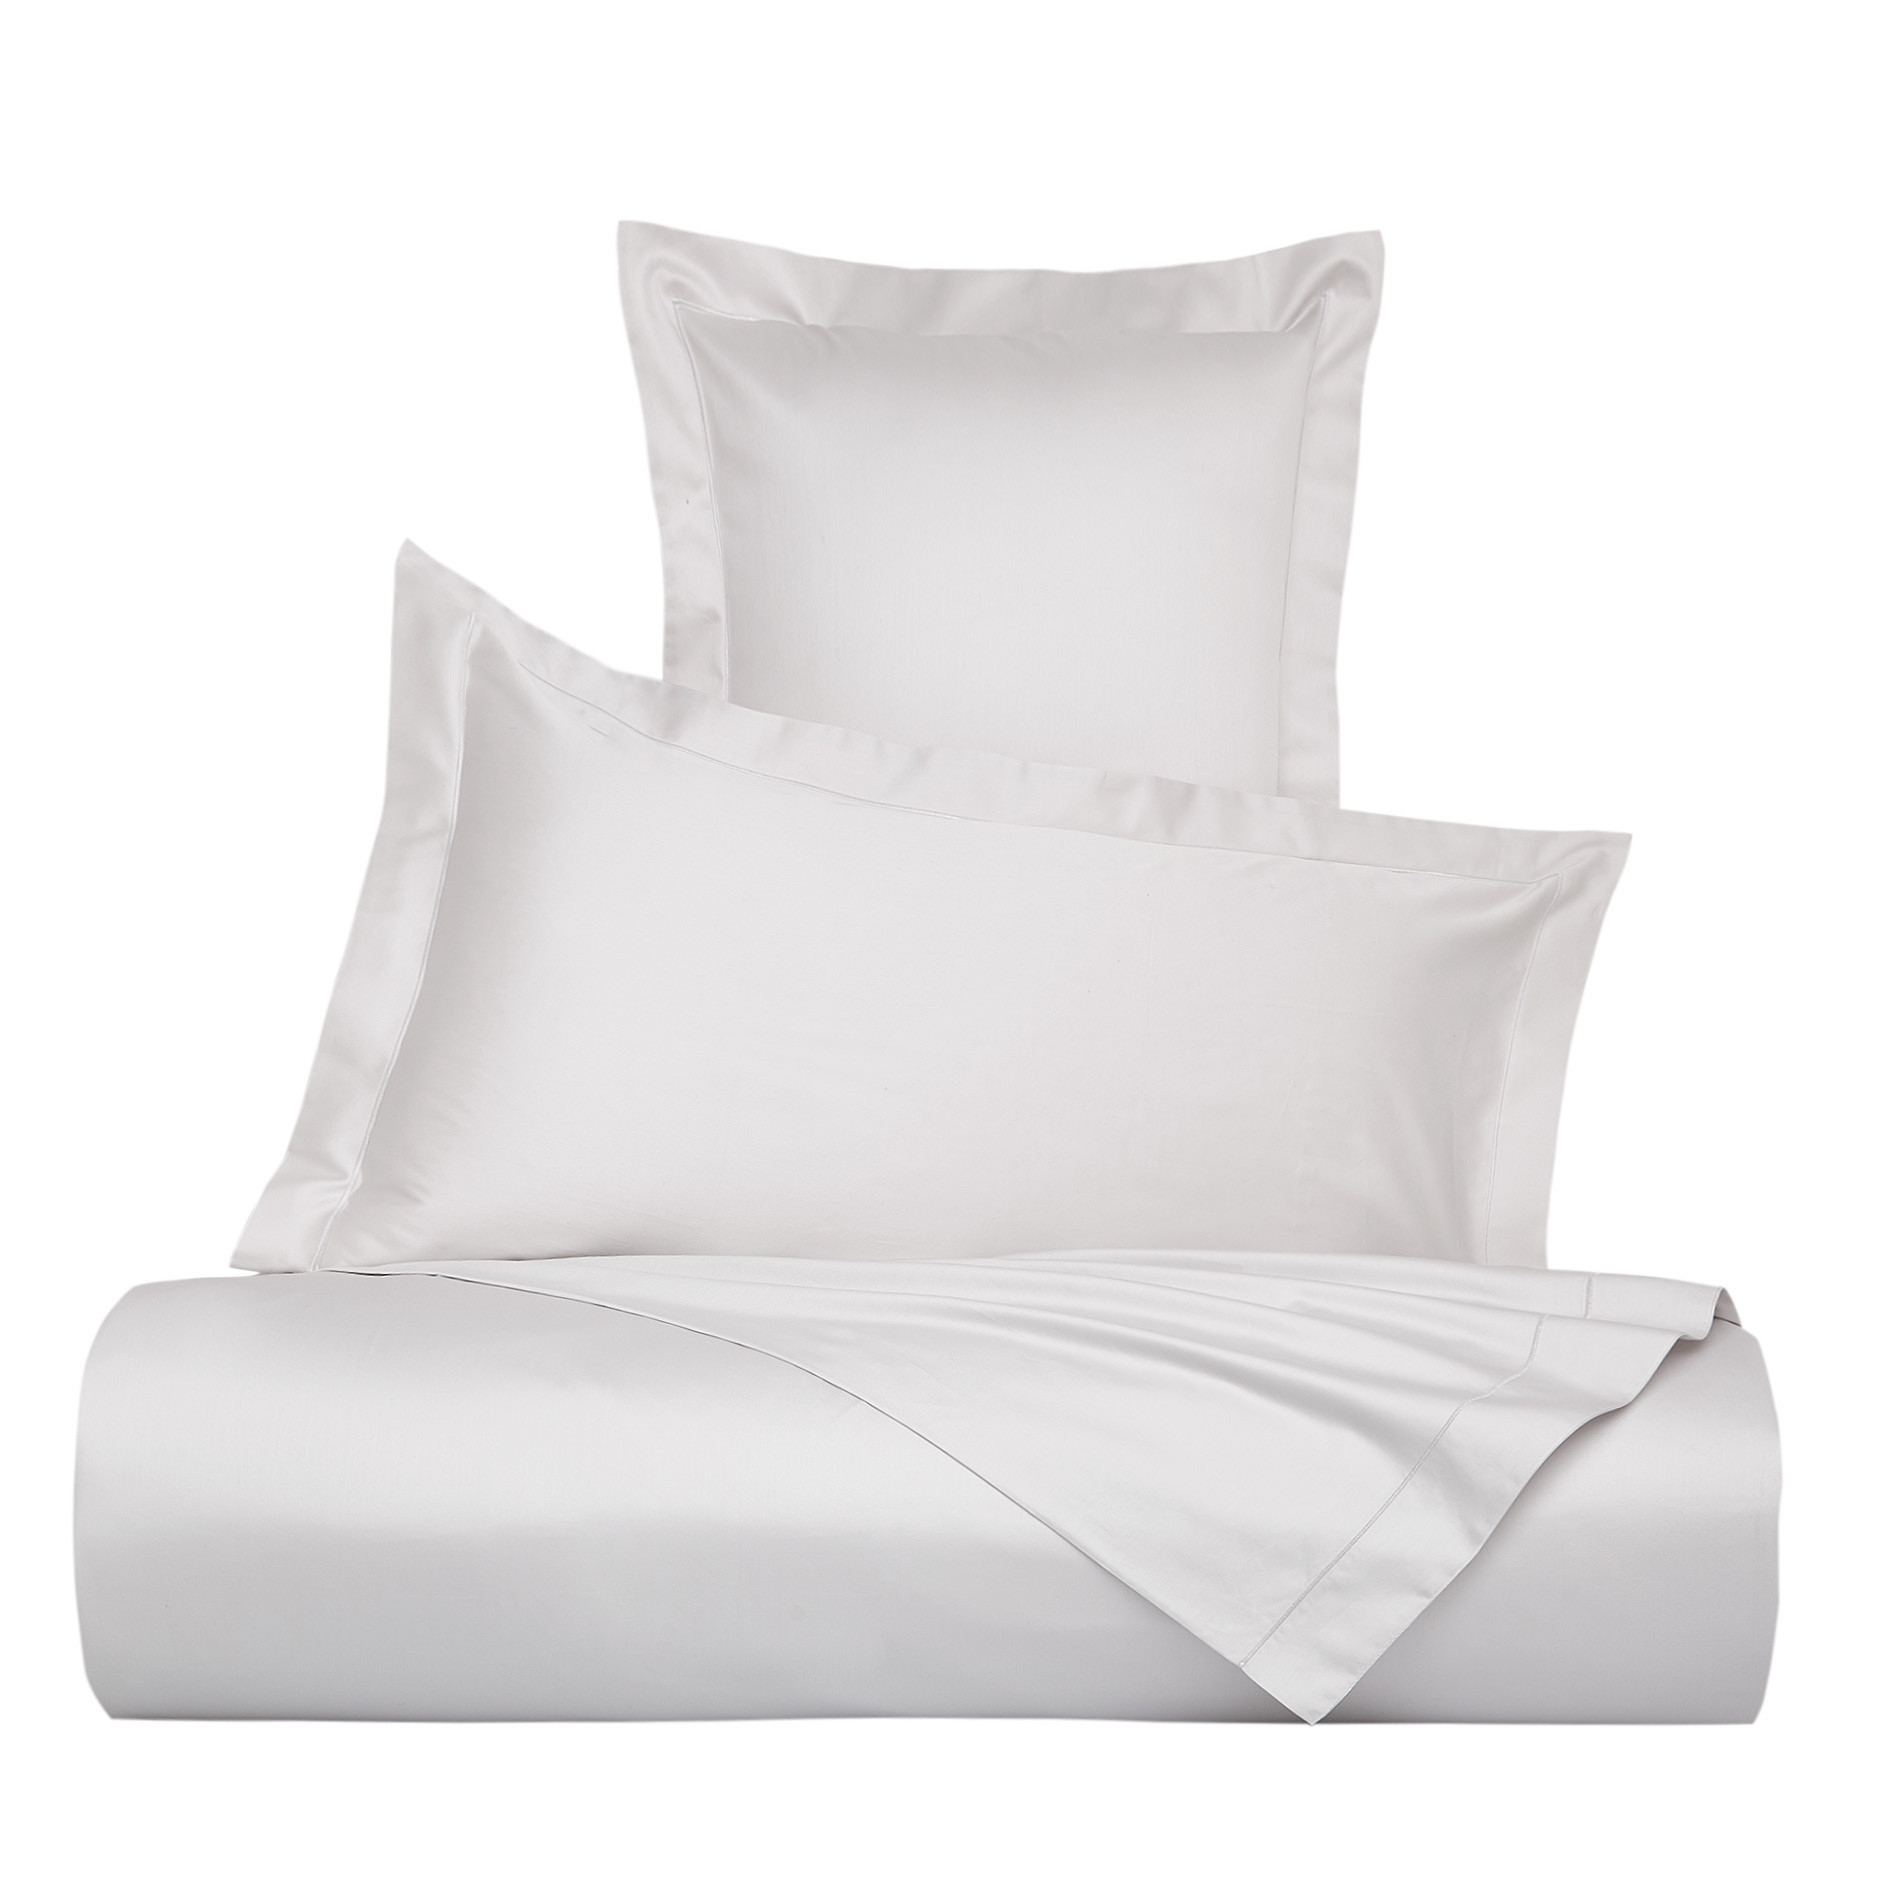 Pillowcase in TC400 satin cotton, Pearl Grey, large image number 2